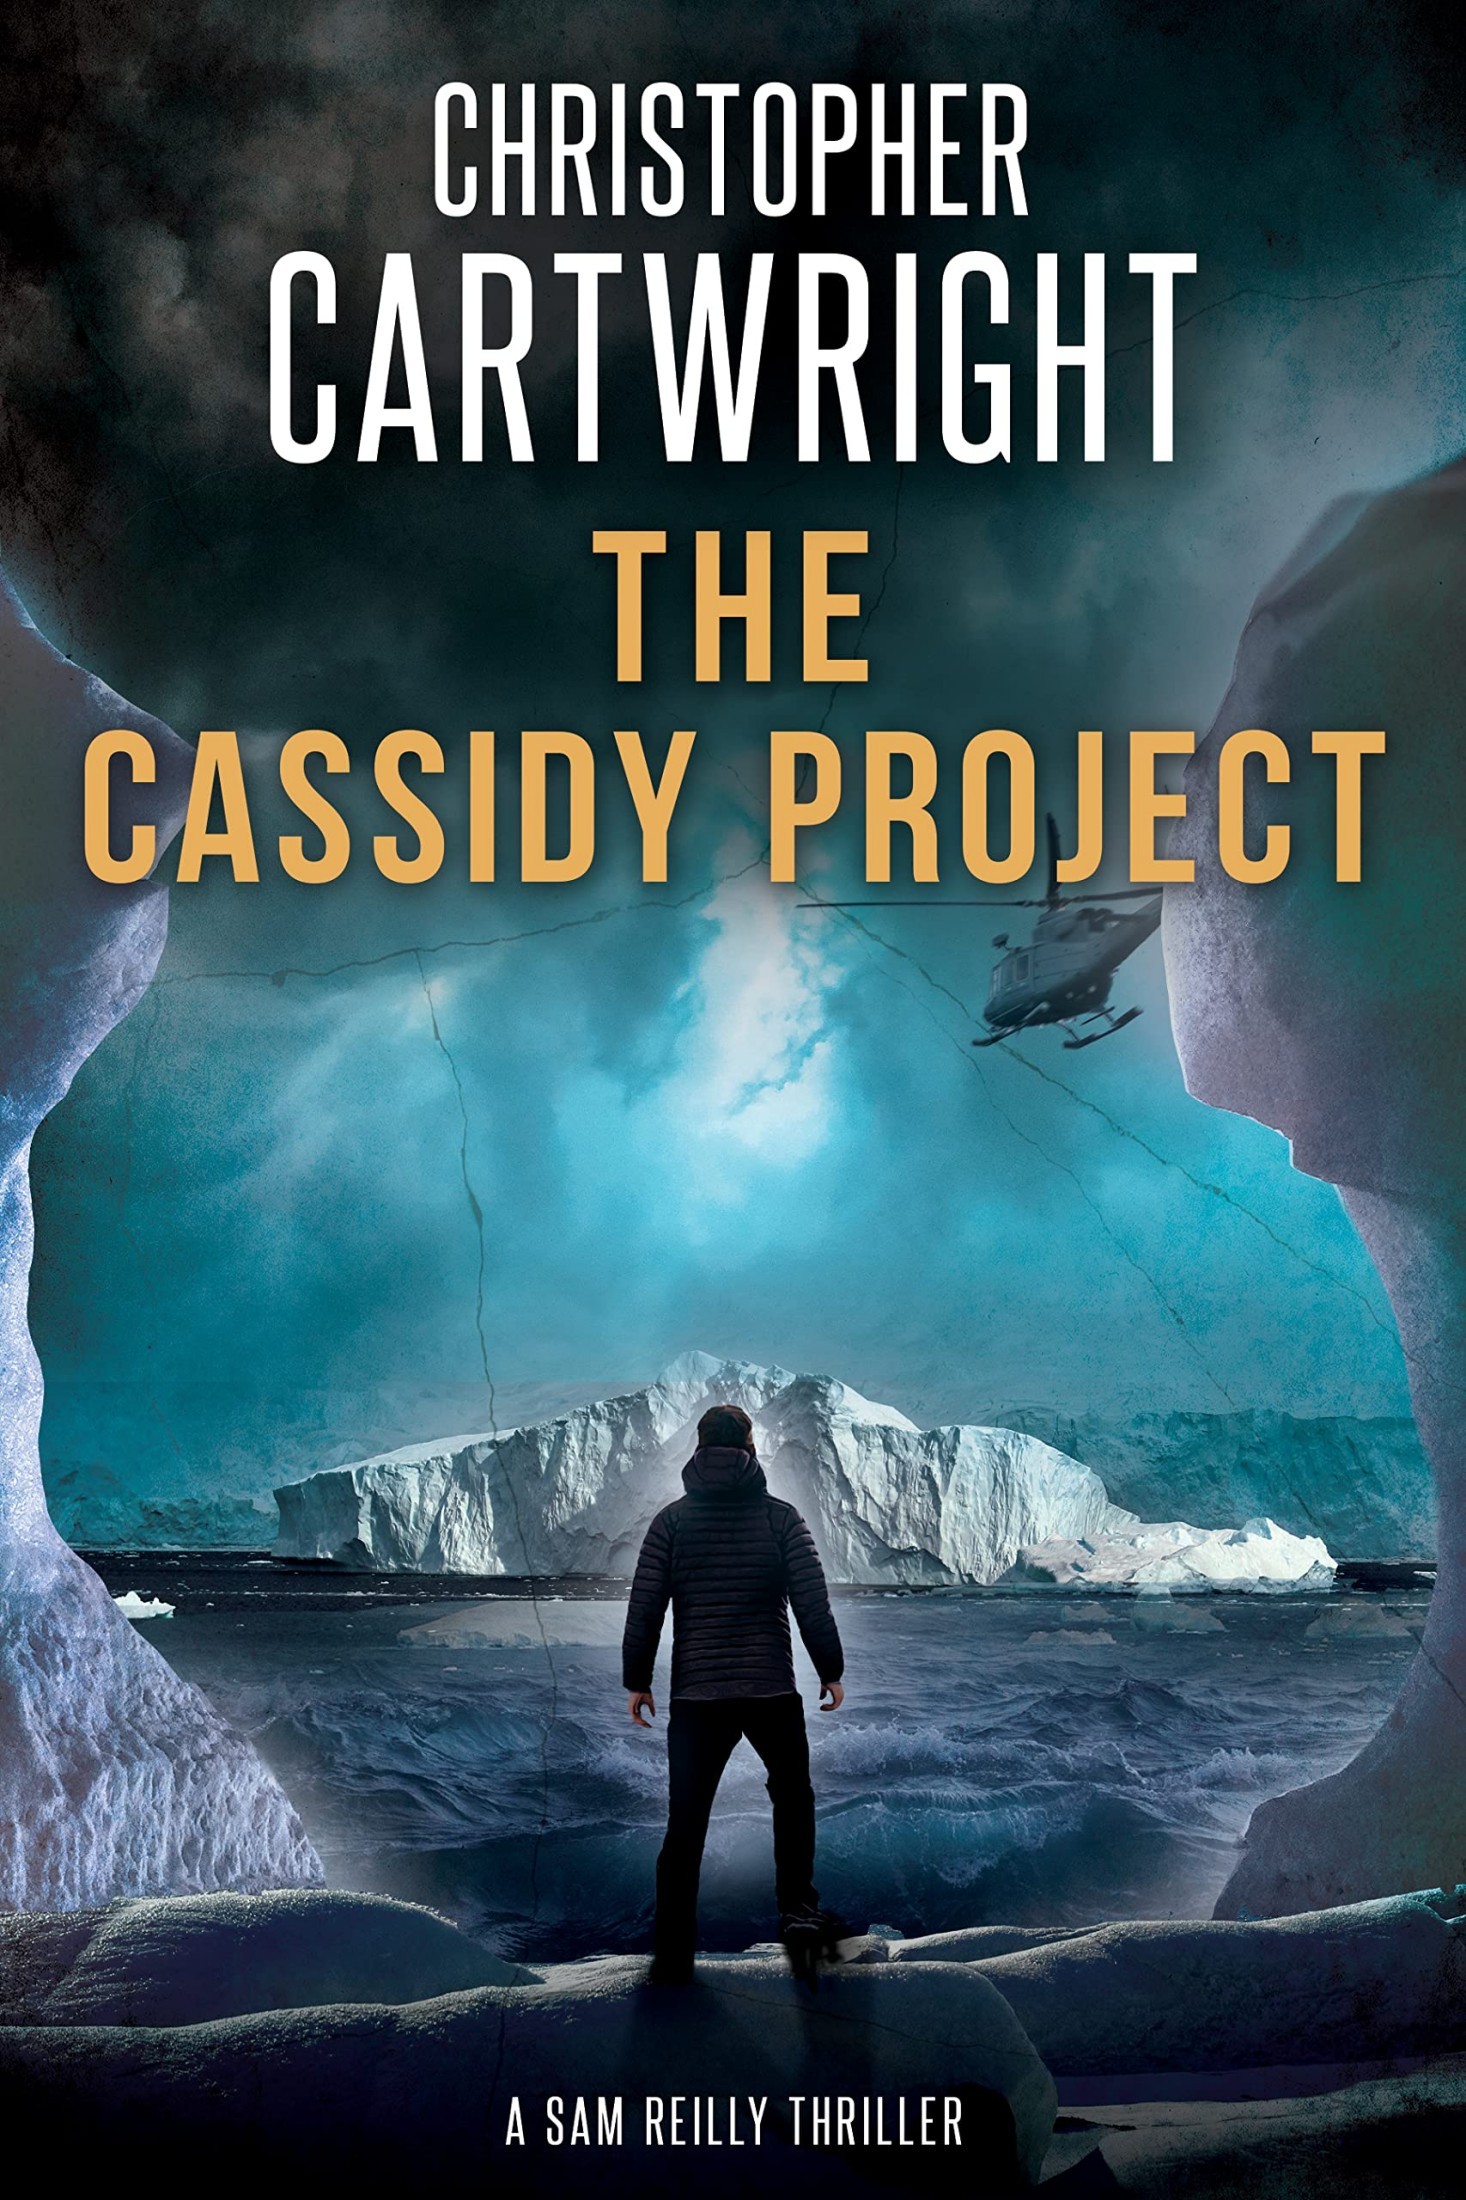 The Cassidy Project